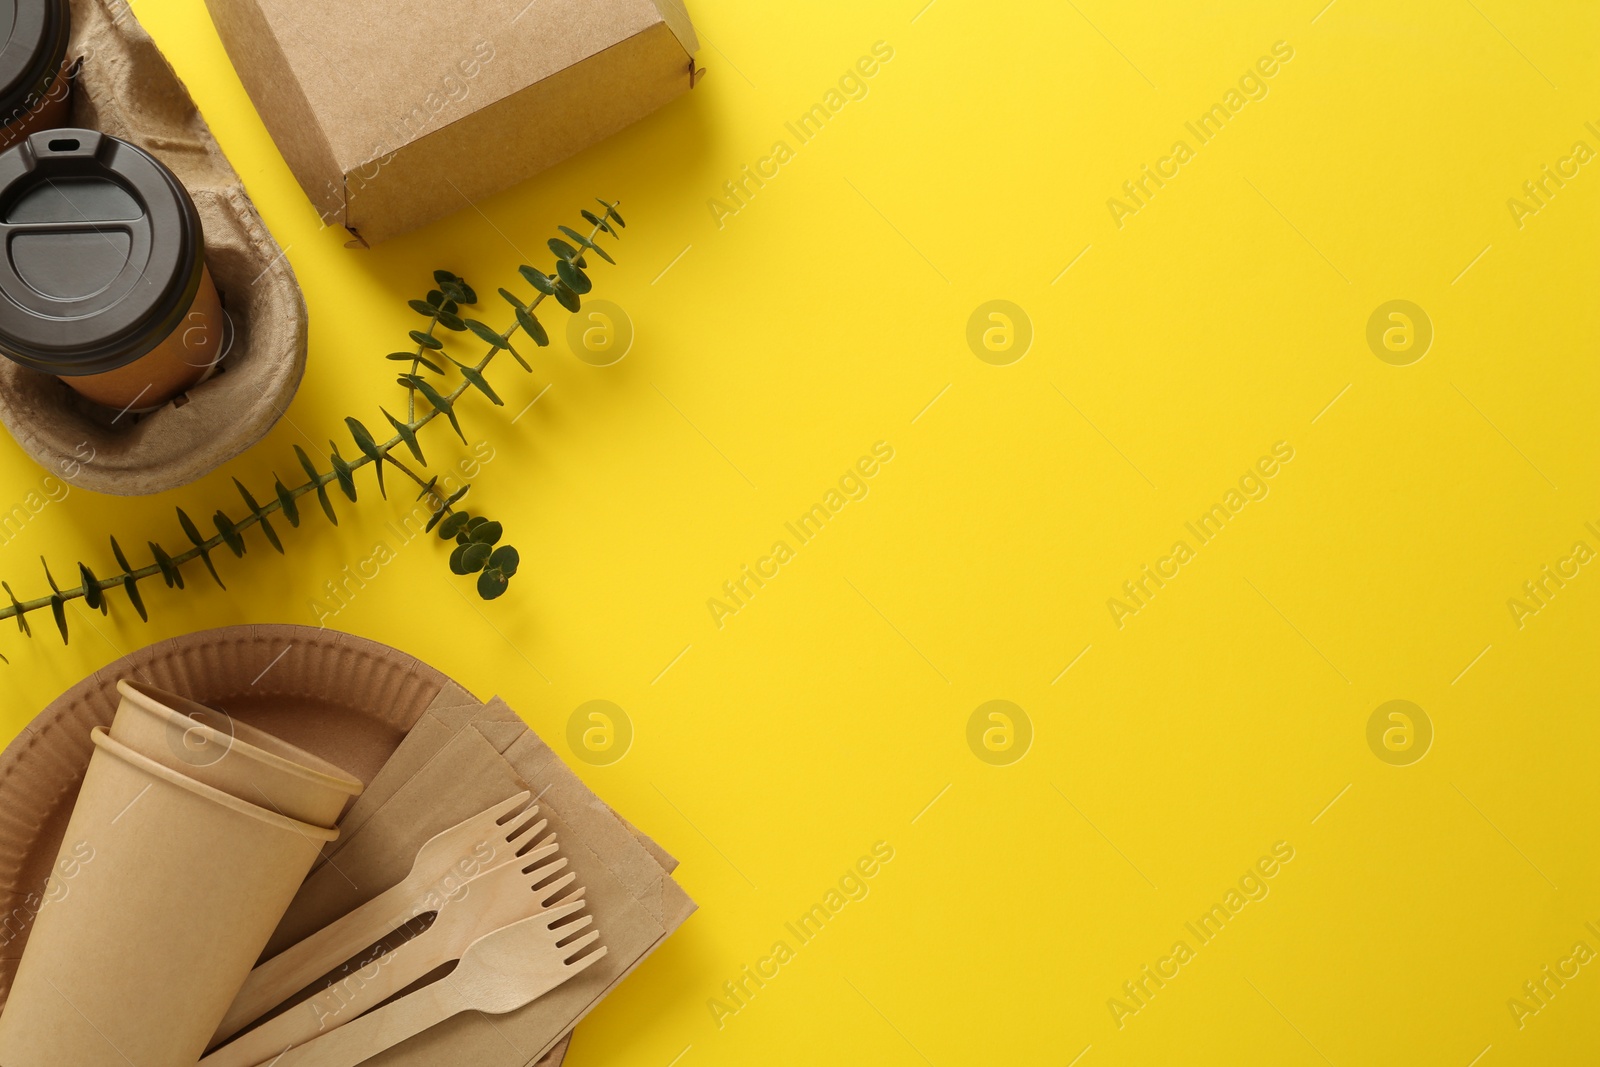 Photo of Flat lay of paper and wooden tableware with green twig on yellow background, space for text. Eco friendly lifestyle